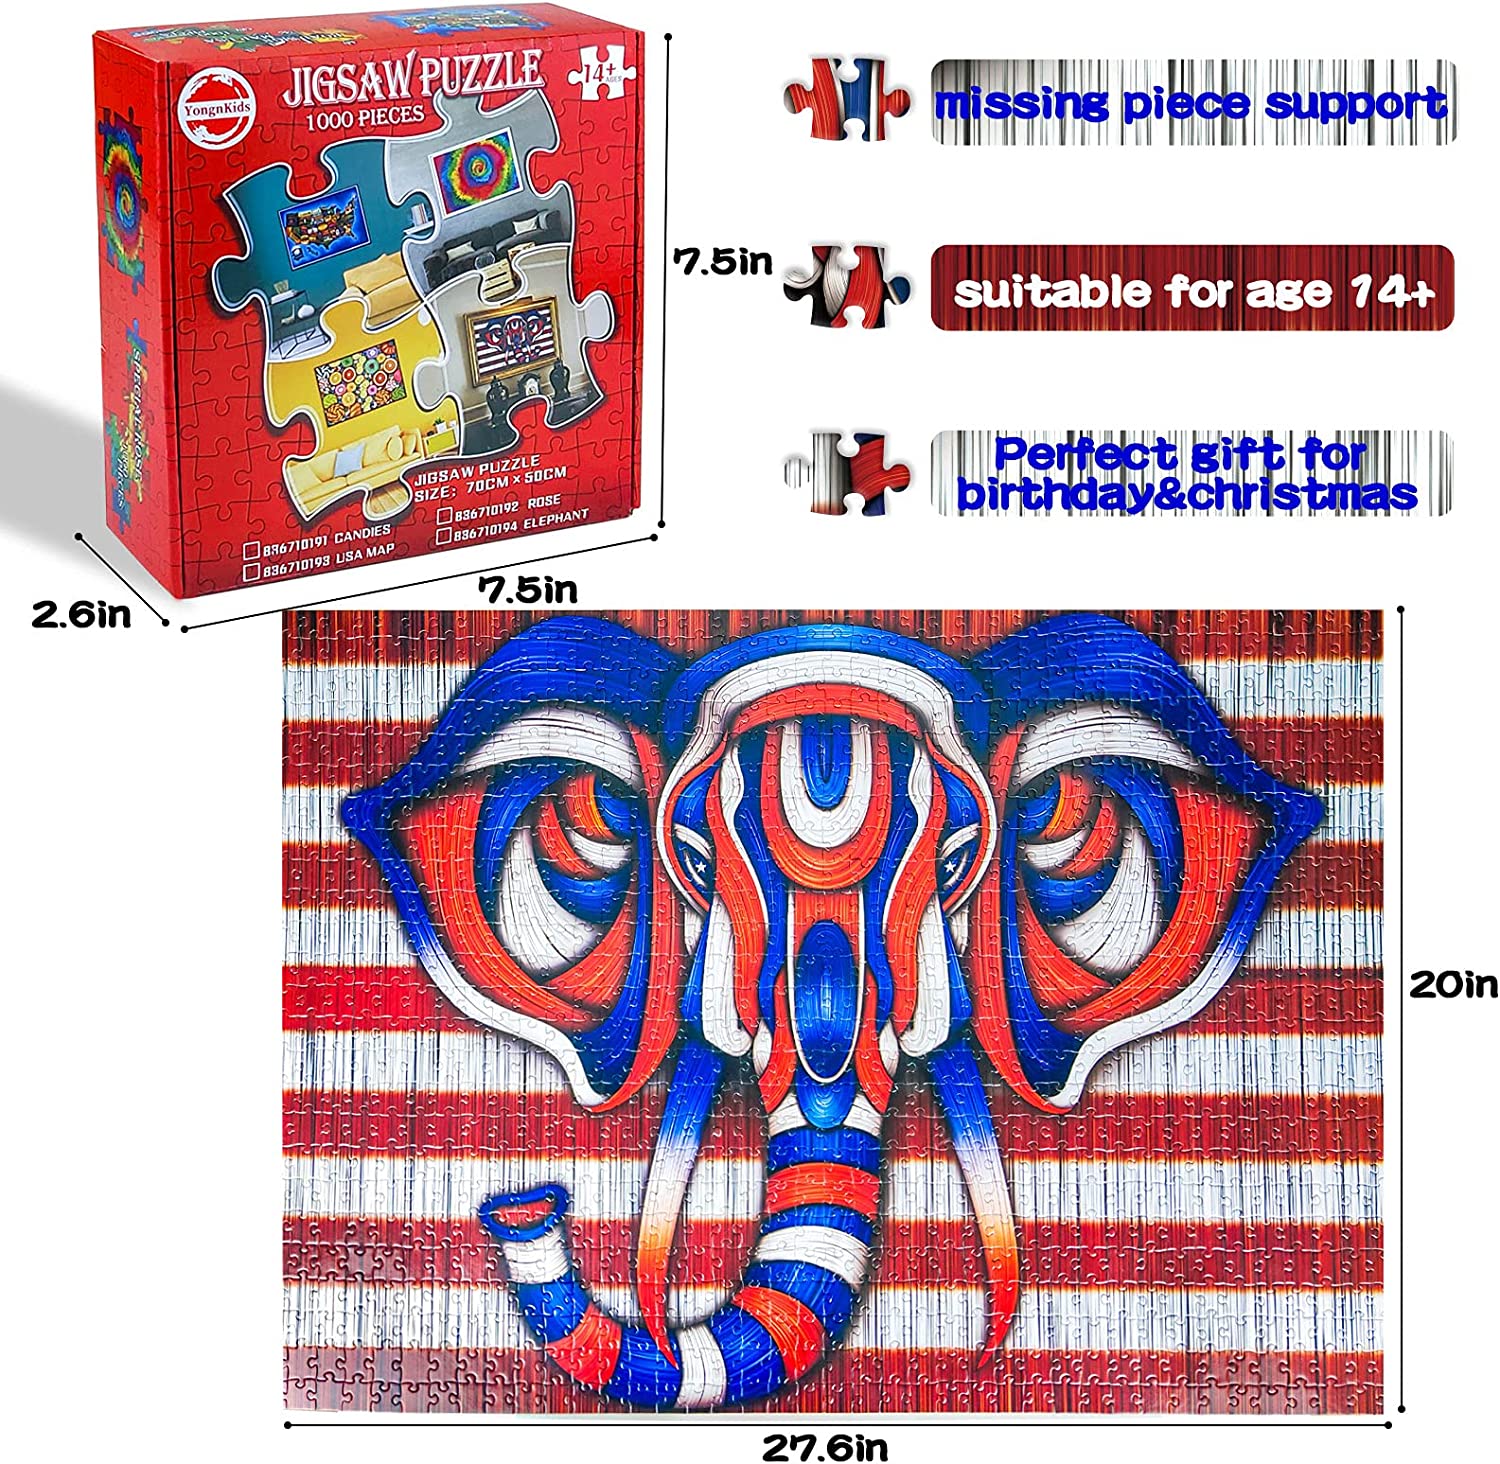 Jigsaw Puzzles for Adults and Kids 1000 Pieces